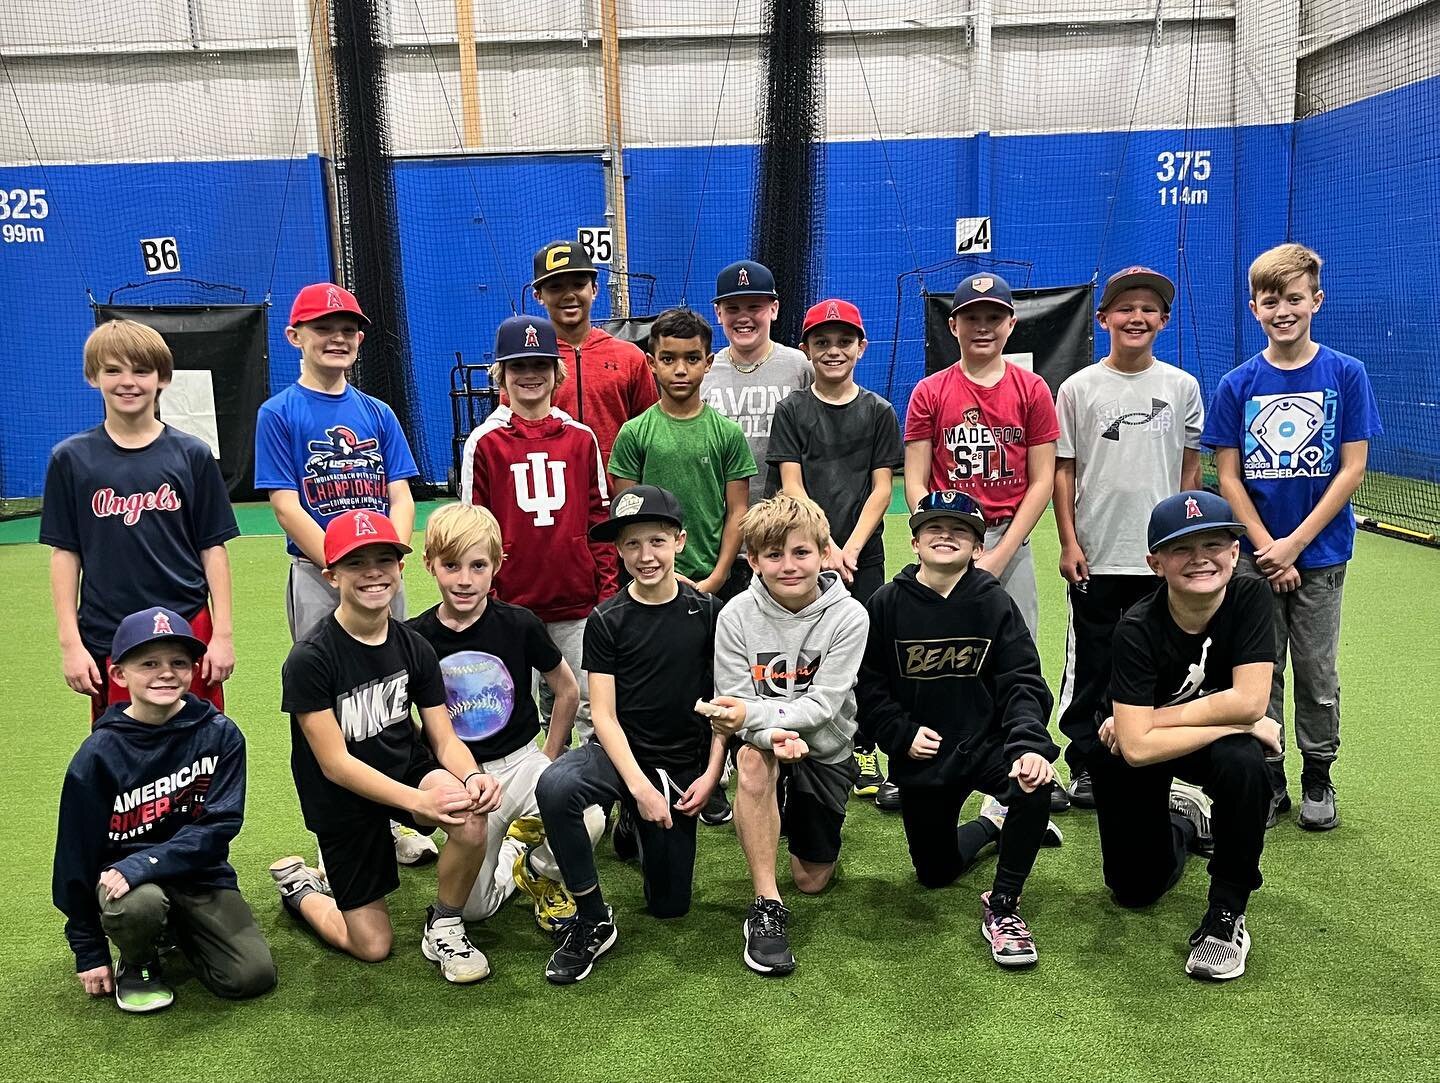 It&rsquo;s that time of year&hellip; Team practice! ⚾️